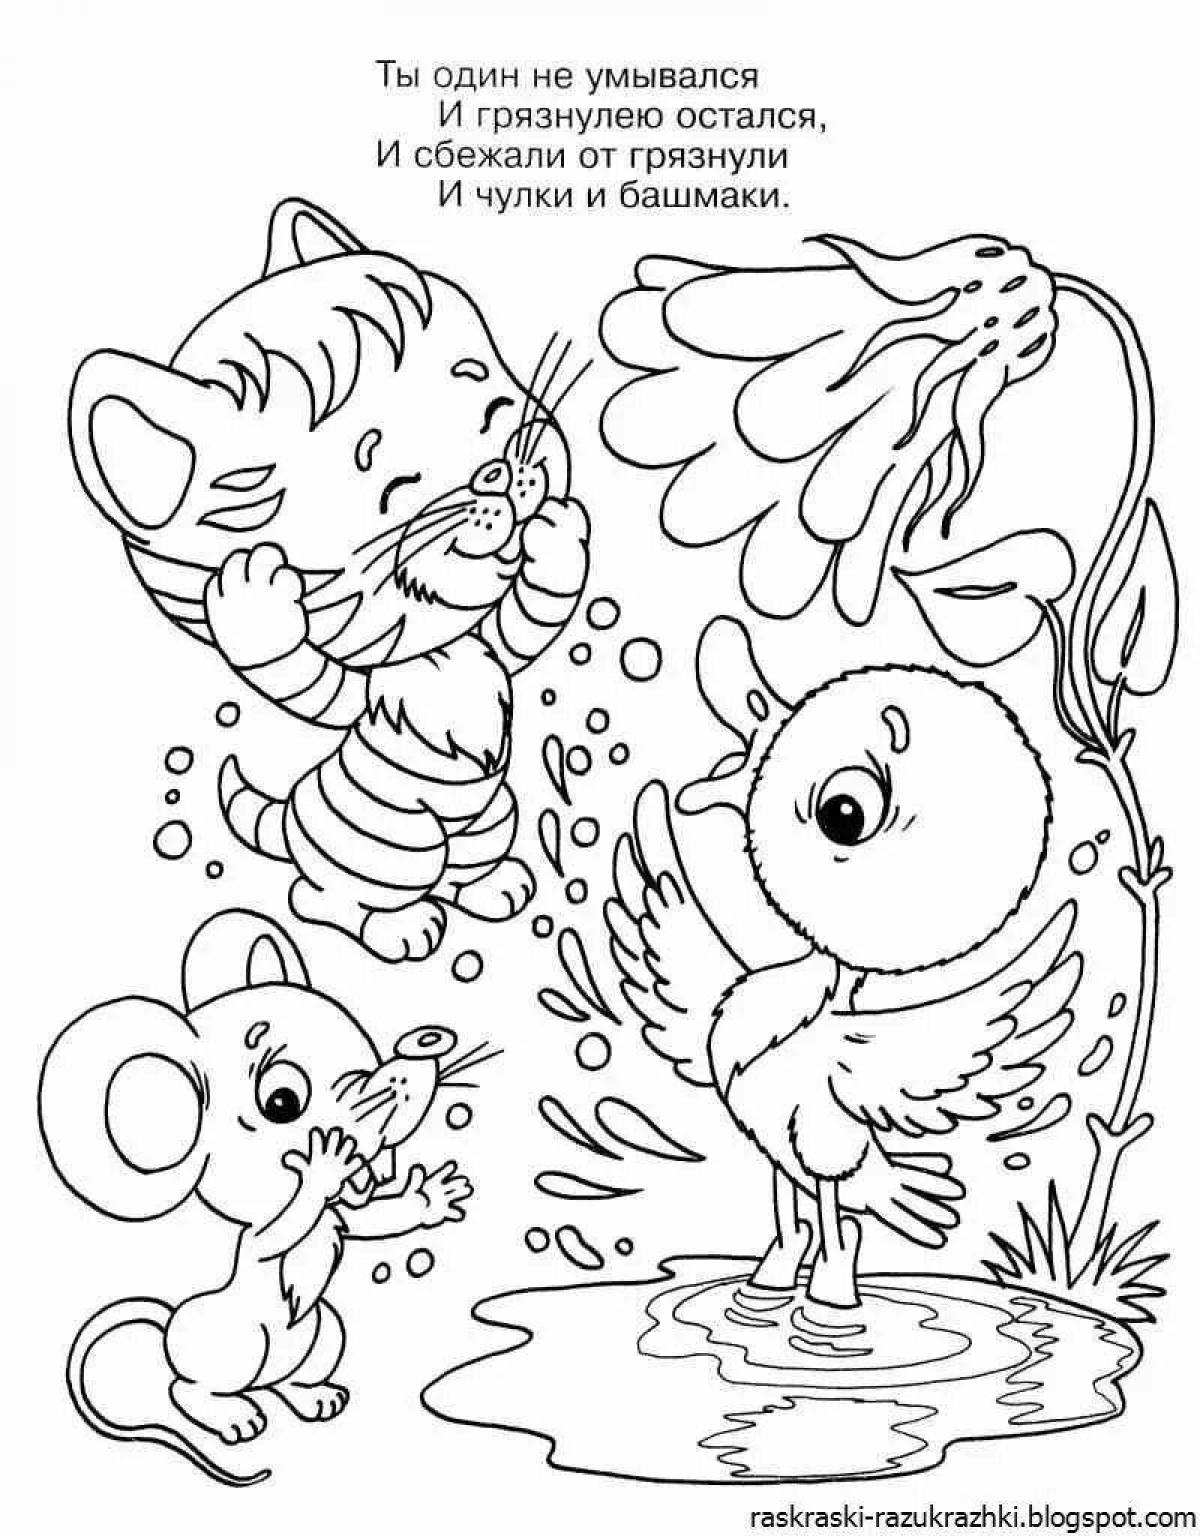 Tangled Confusion Coloring Page